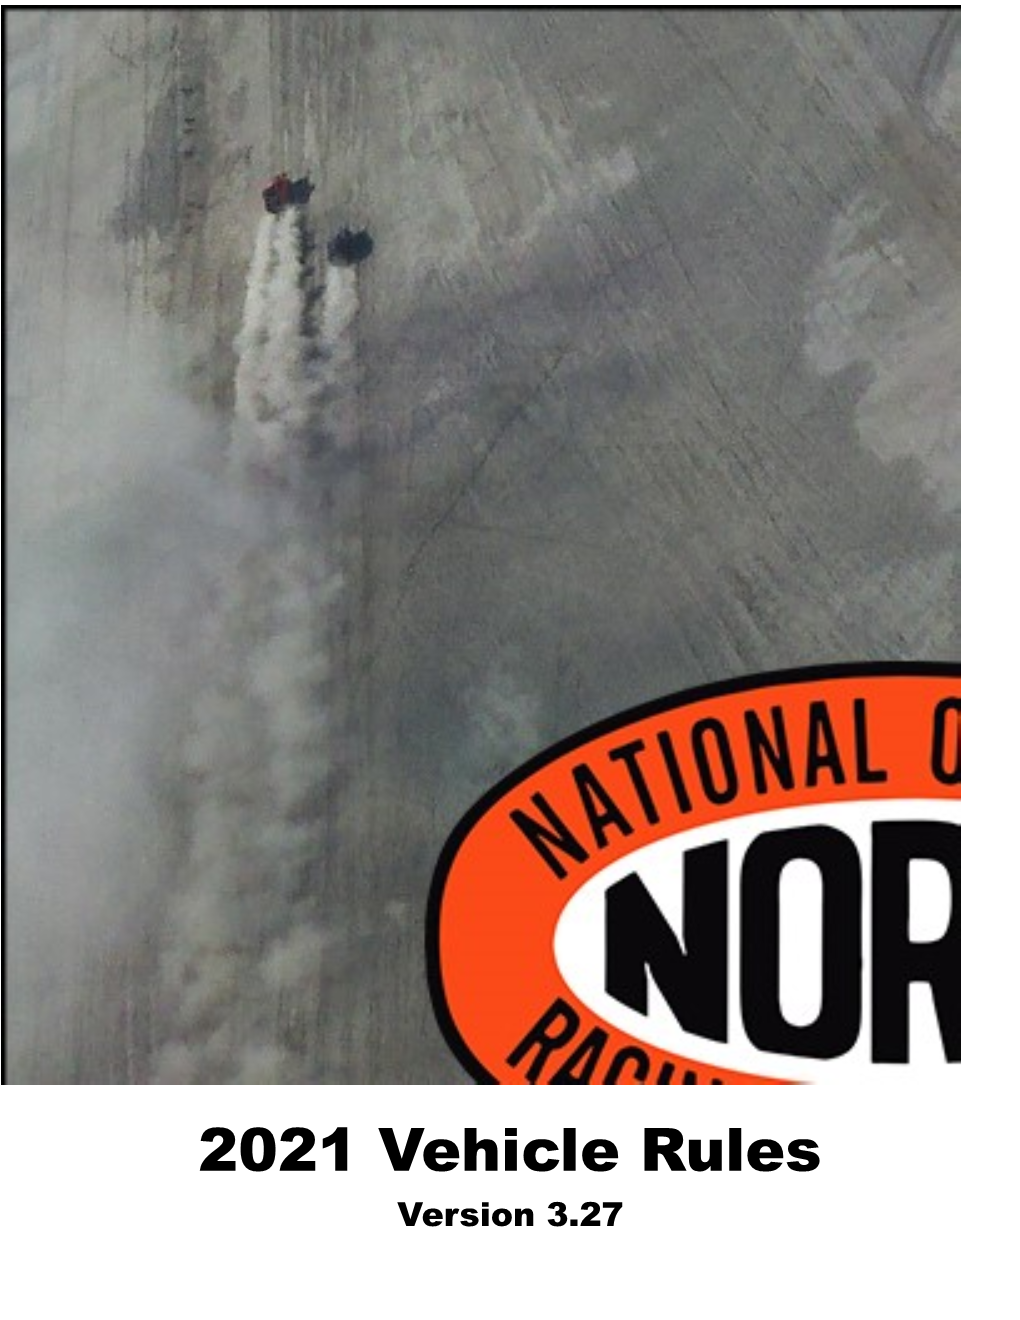 Download the 2021 Vehicle Rules